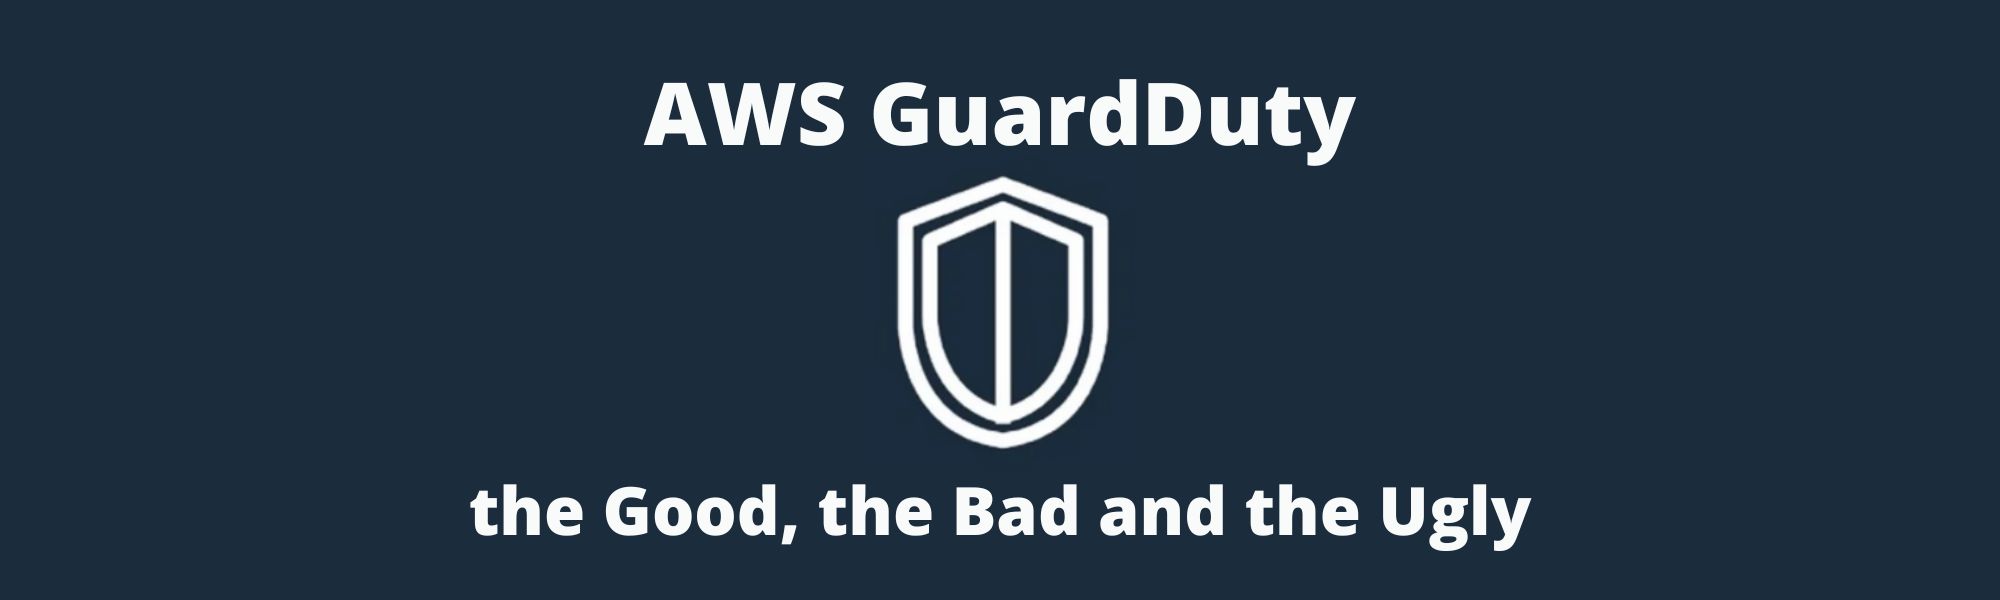 If you listen to anyone discussing AWS security, you probably heard about Amazon GuardDuty. It's an intelligent "threat detection" service from AWS. Should you enable GuardDuty? I hope you'll reach closer to your answer by the end of this blog post.